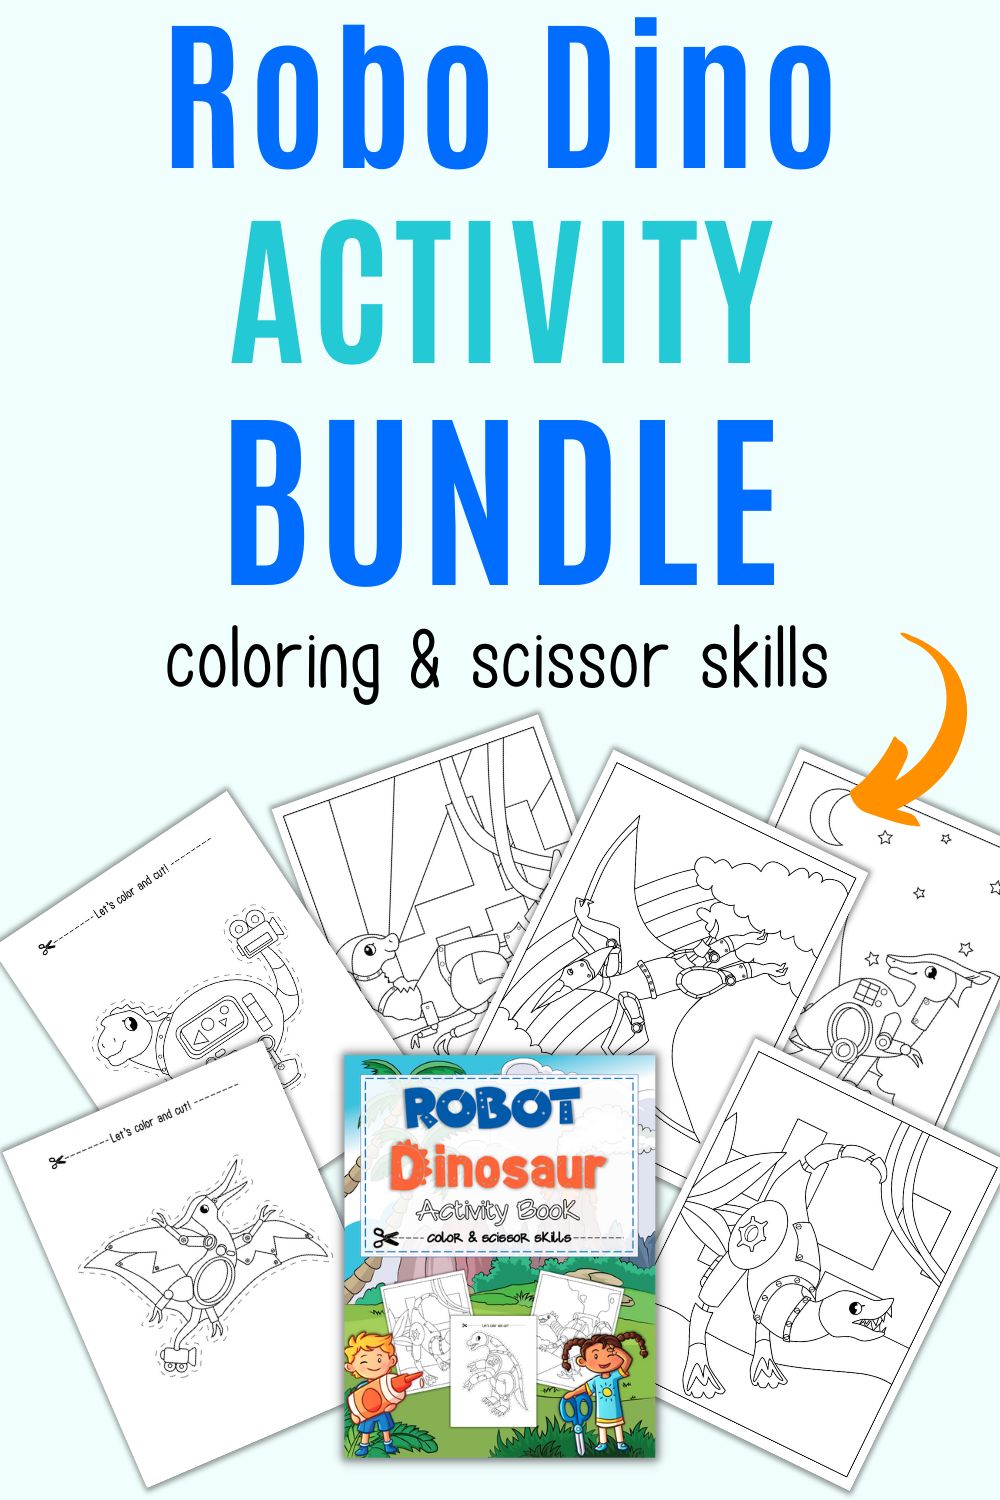 Text "robo dino activity bundle - coloring & scissor skills" with a preview of pages from the book